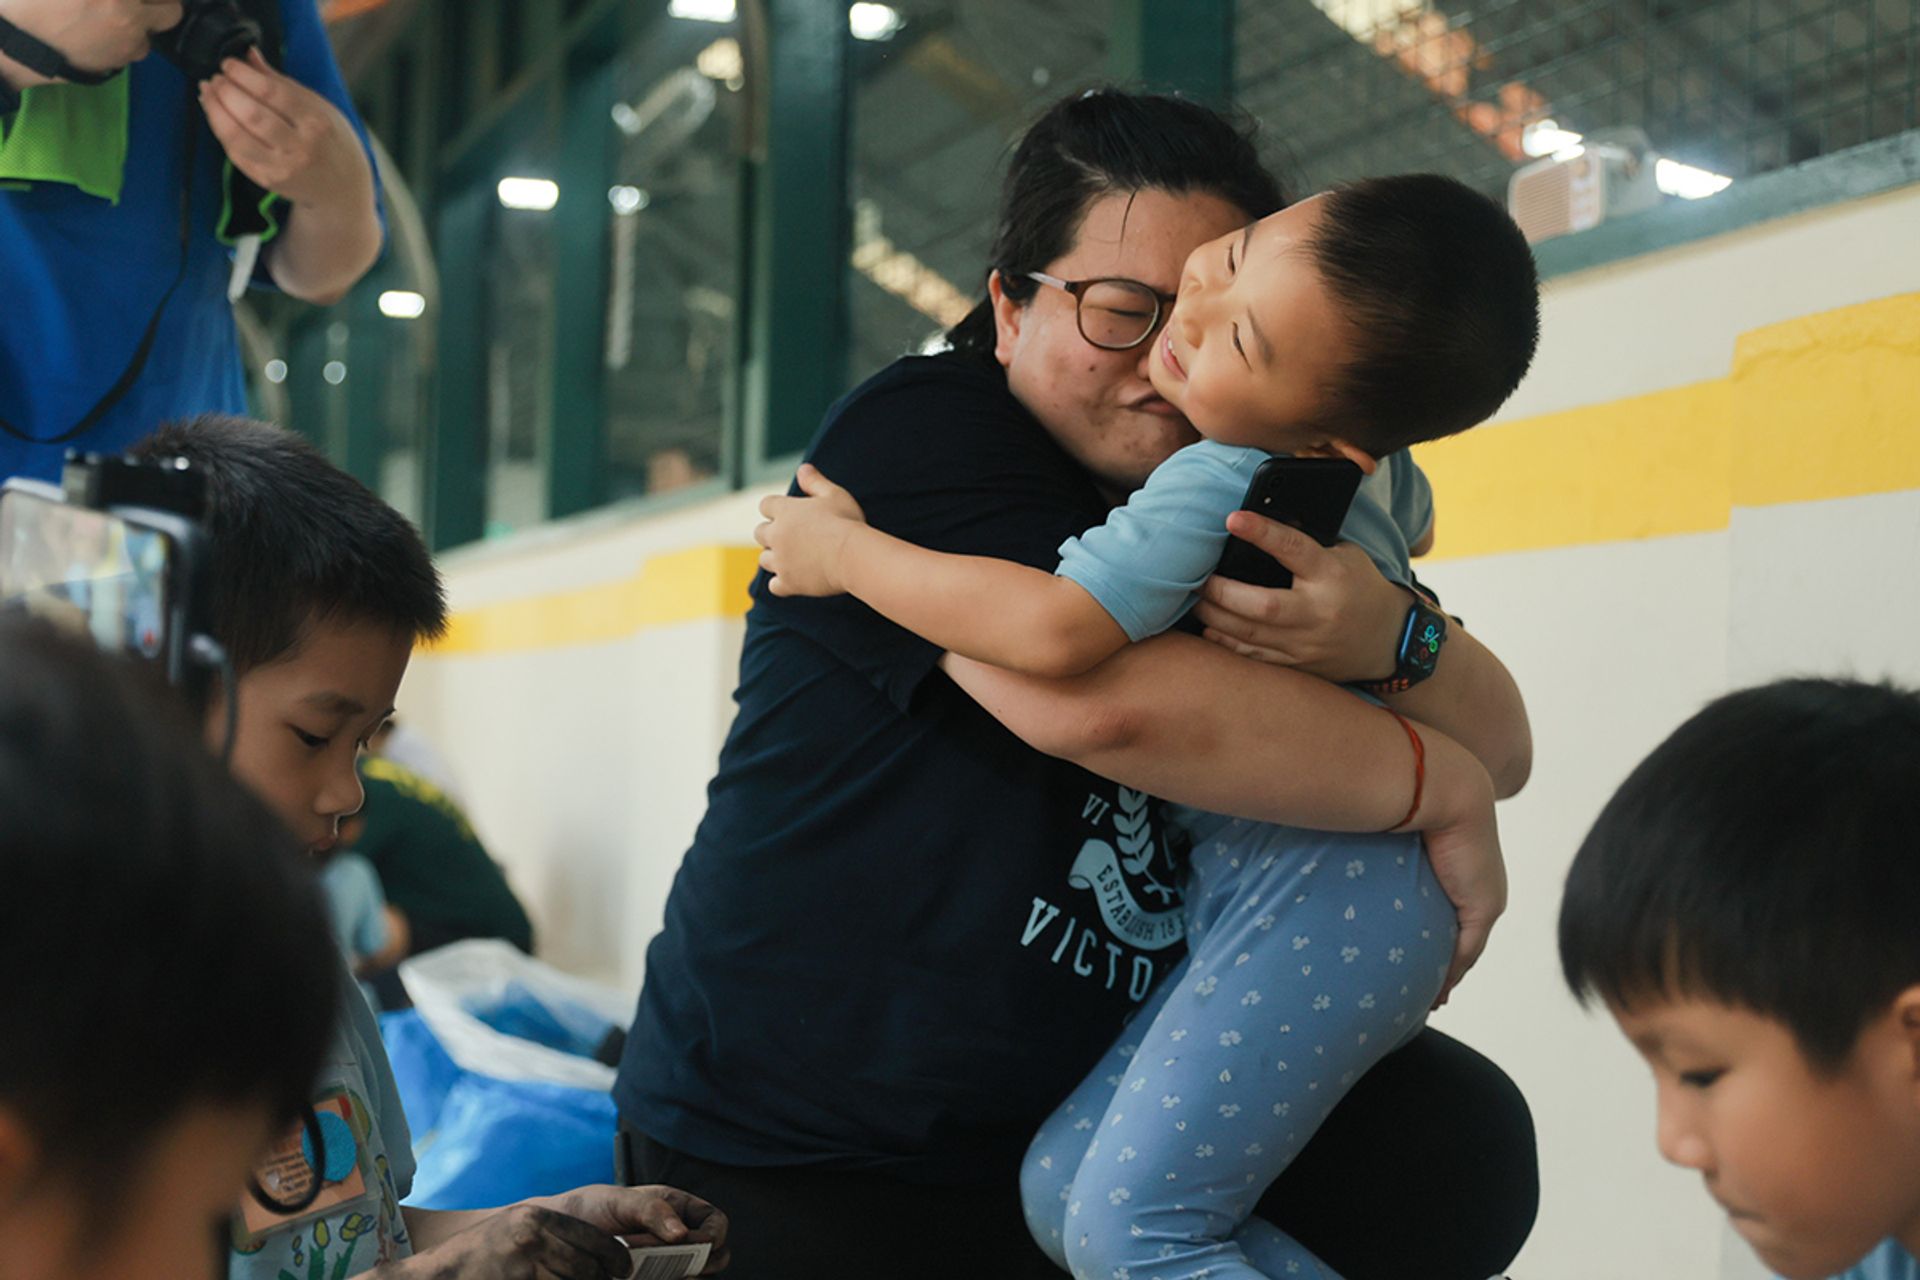 Ms You gives Jacob Zhai a hug after he succeeds on his first try in starting the fire. During practice in school, he had faced several setbacks.